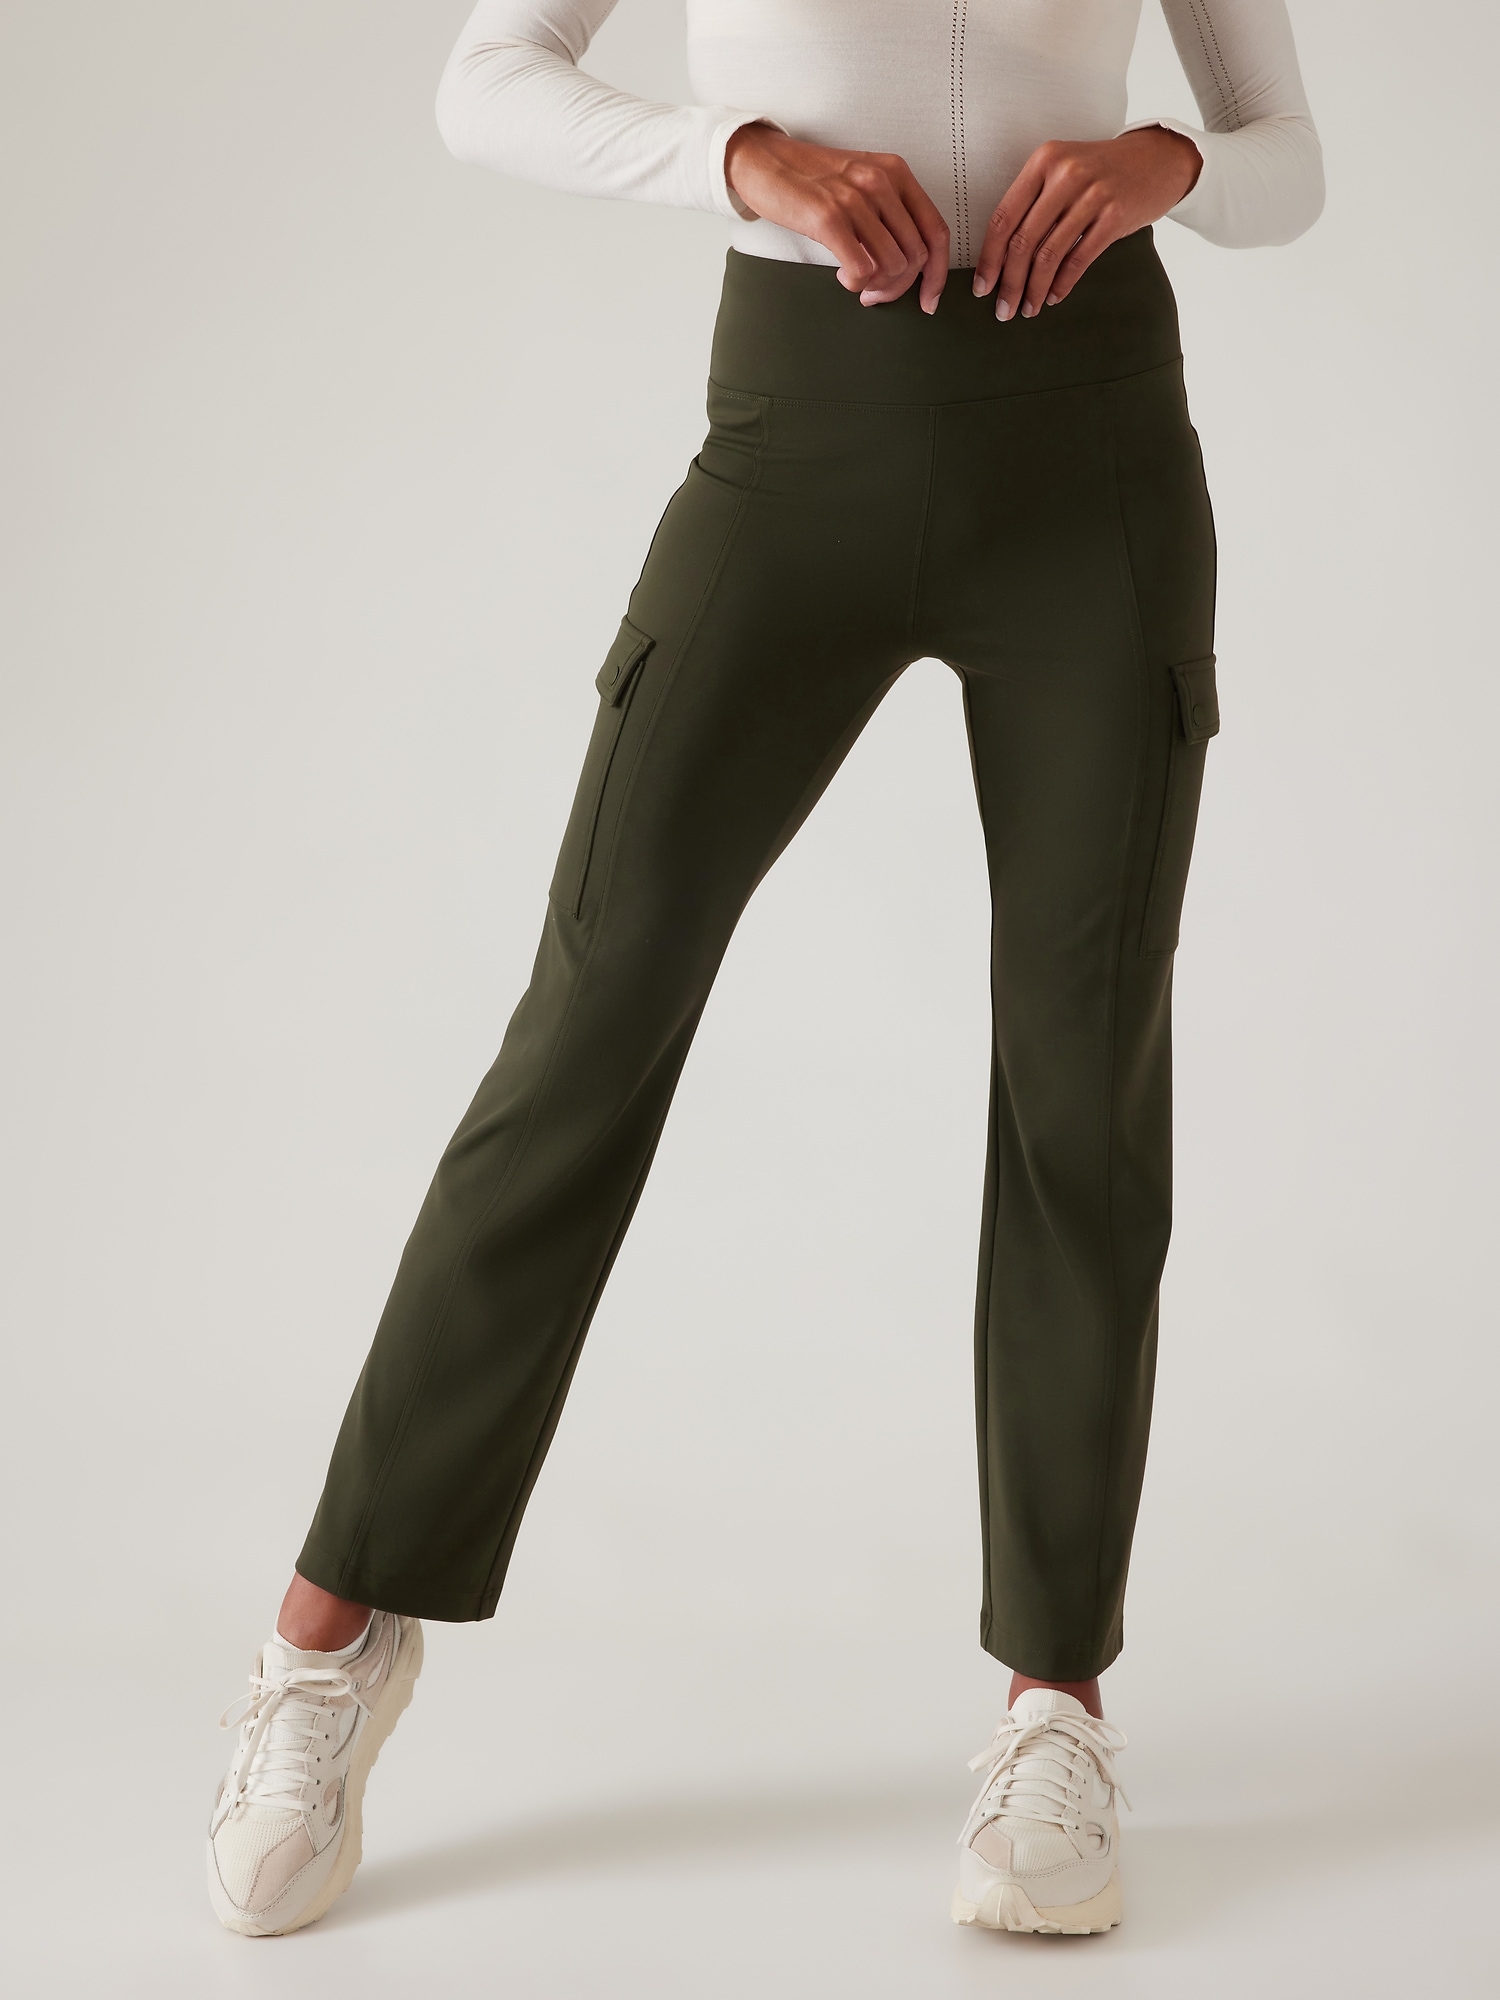 Womens Pants with Pockets